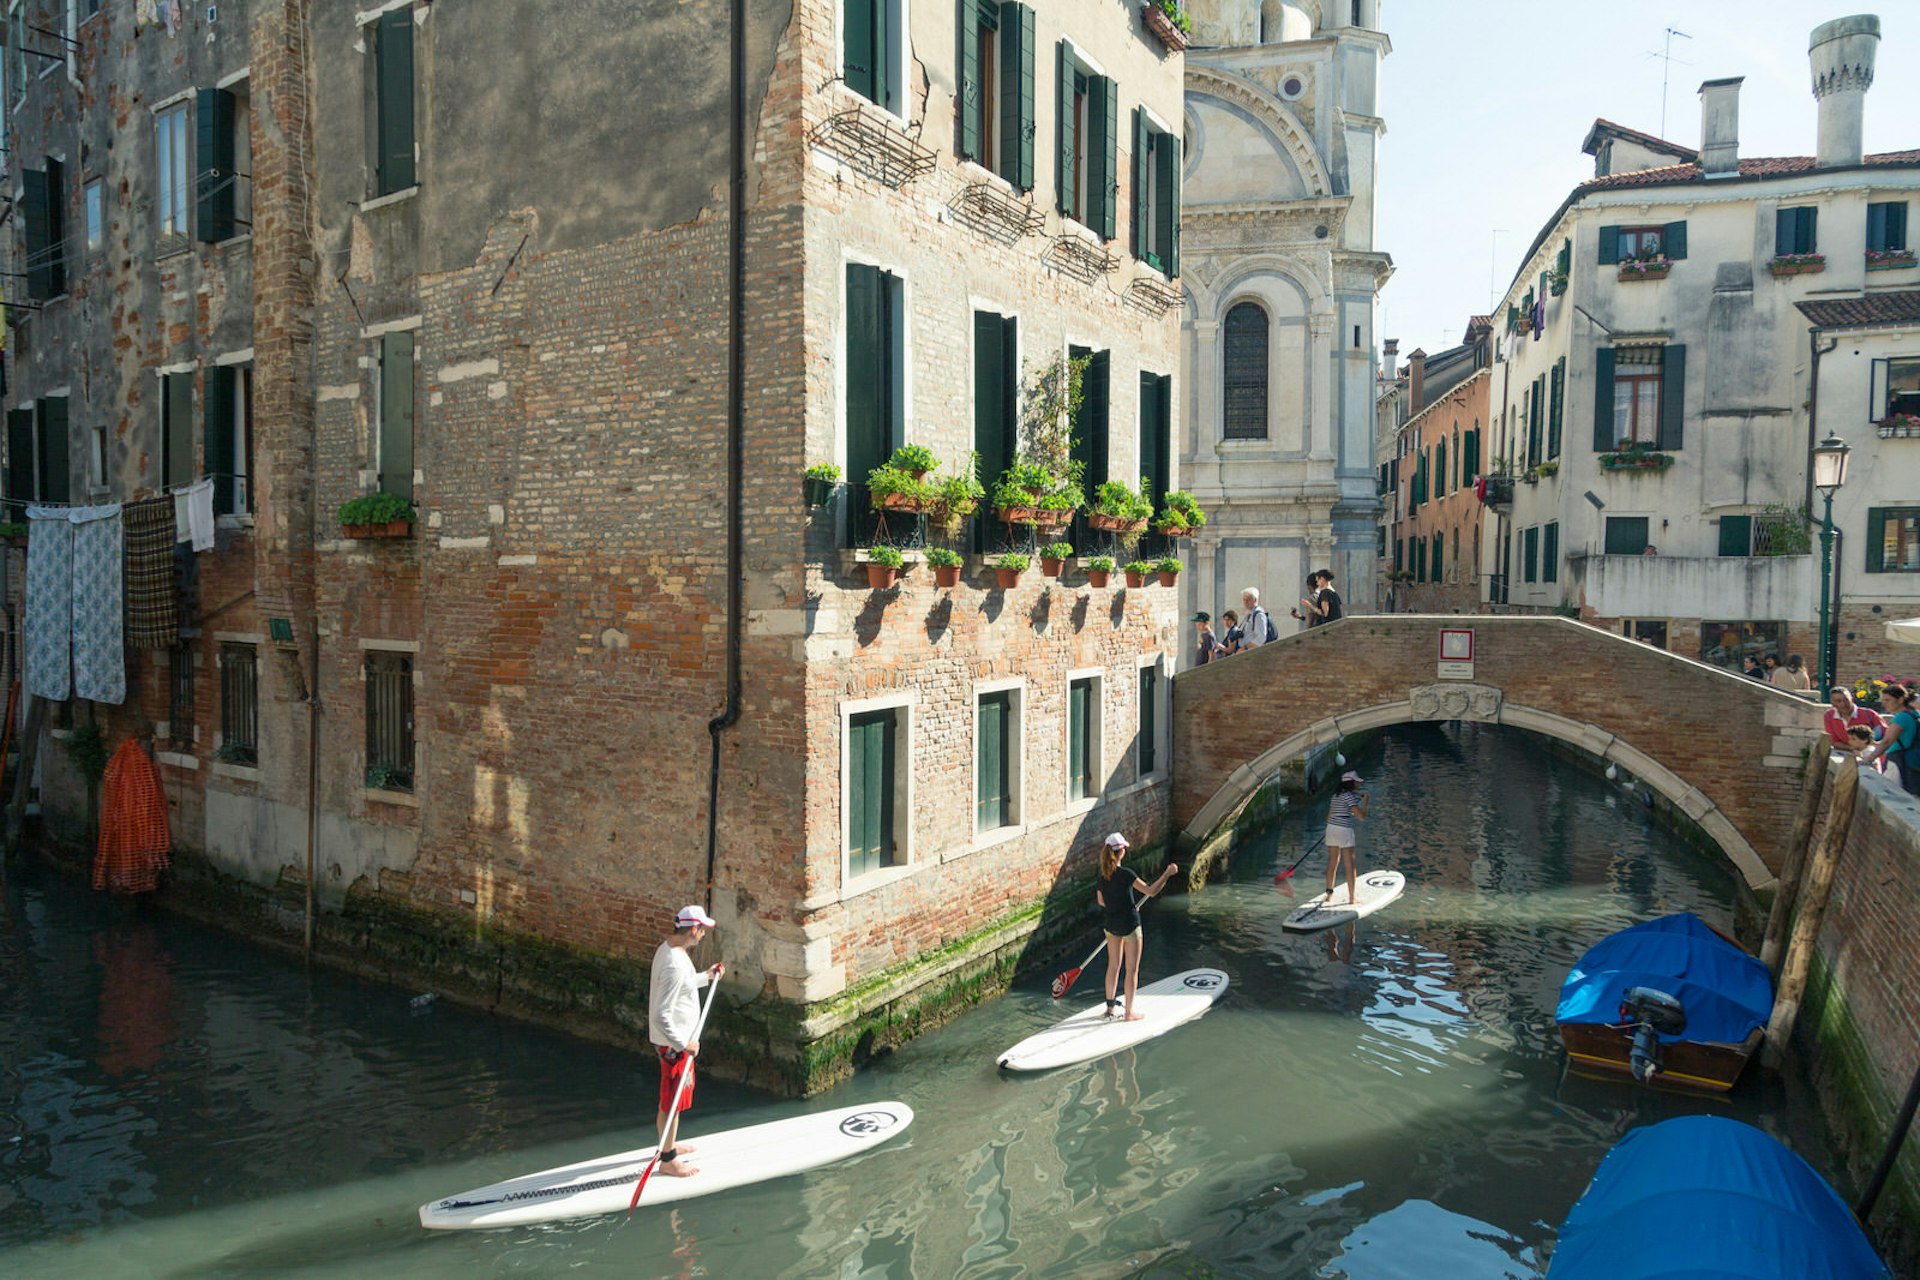 Getting up-close-and-personal with Venice's canals